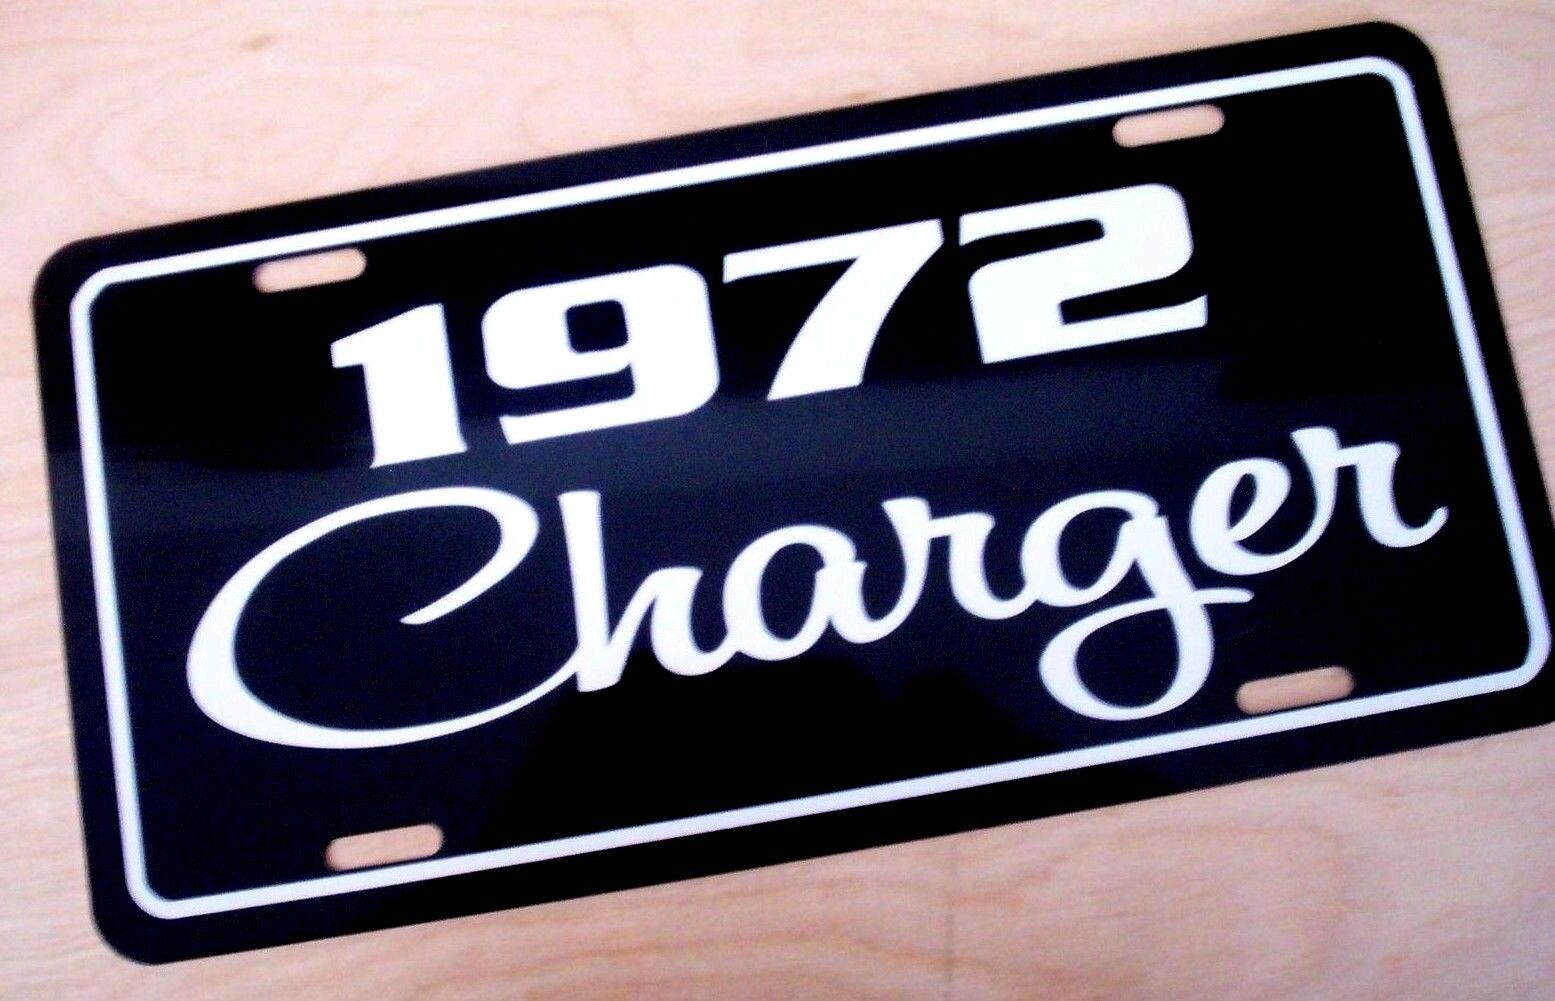 1972 Dodge CHARGER license plate tag 72  Mopar Performance Muscle Car